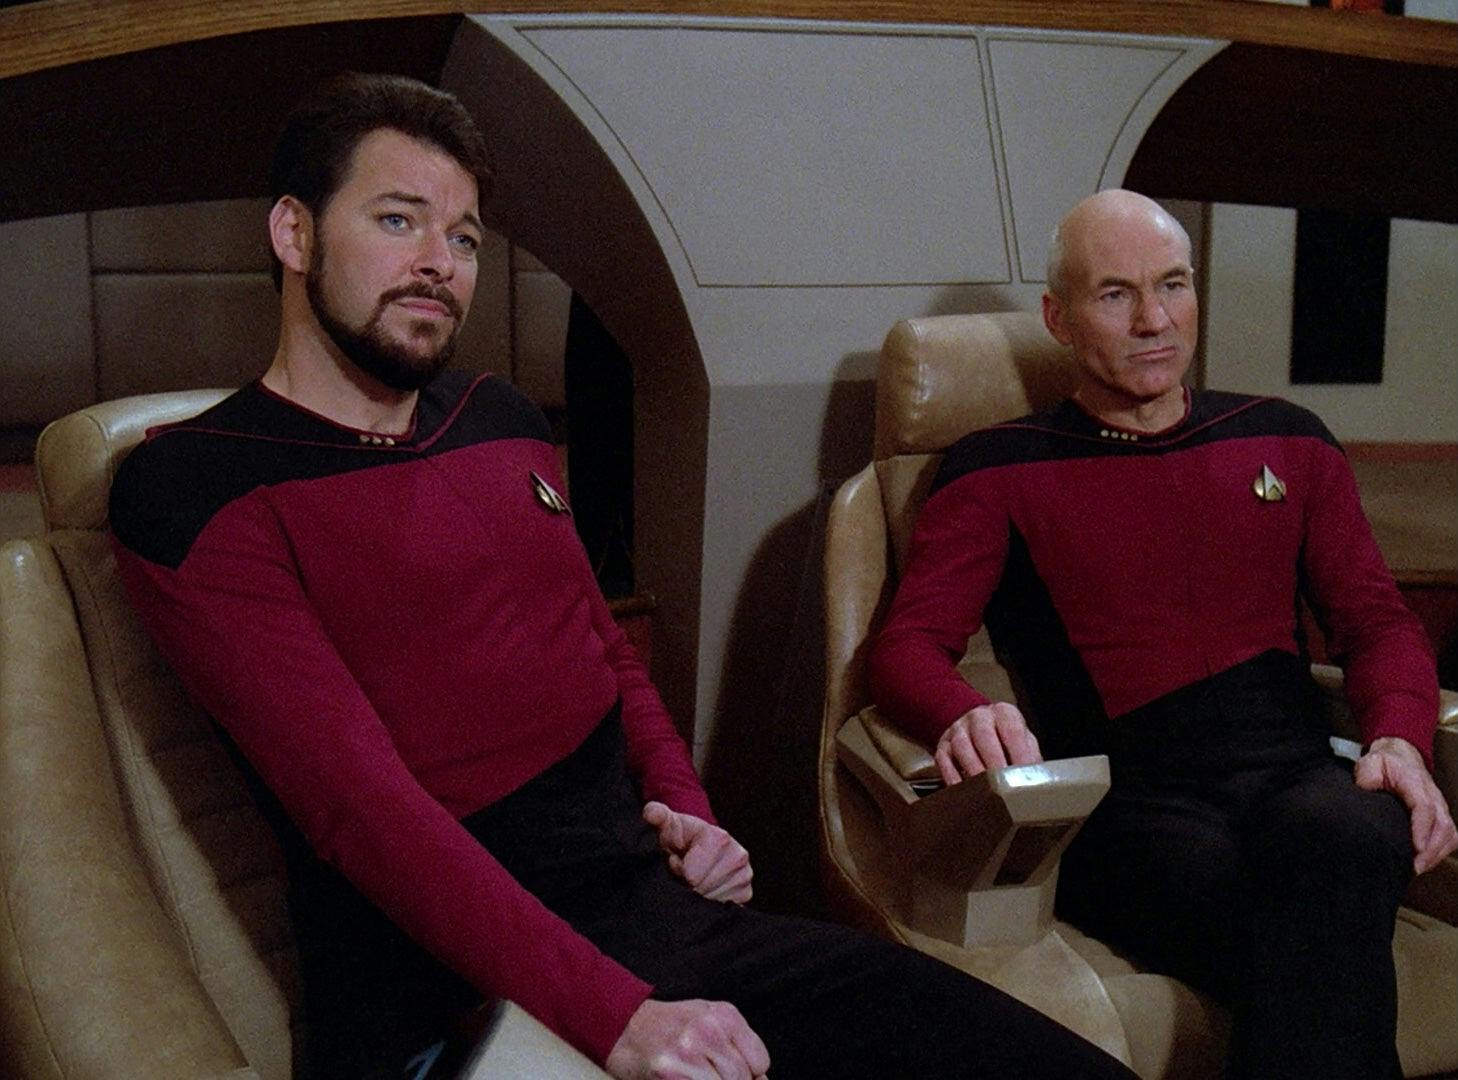 On the bridge of the Enterprise, Riker sits next to Picard who's in the center seat as they both look ahead at the viewscreen in 'The Icarus Factor'